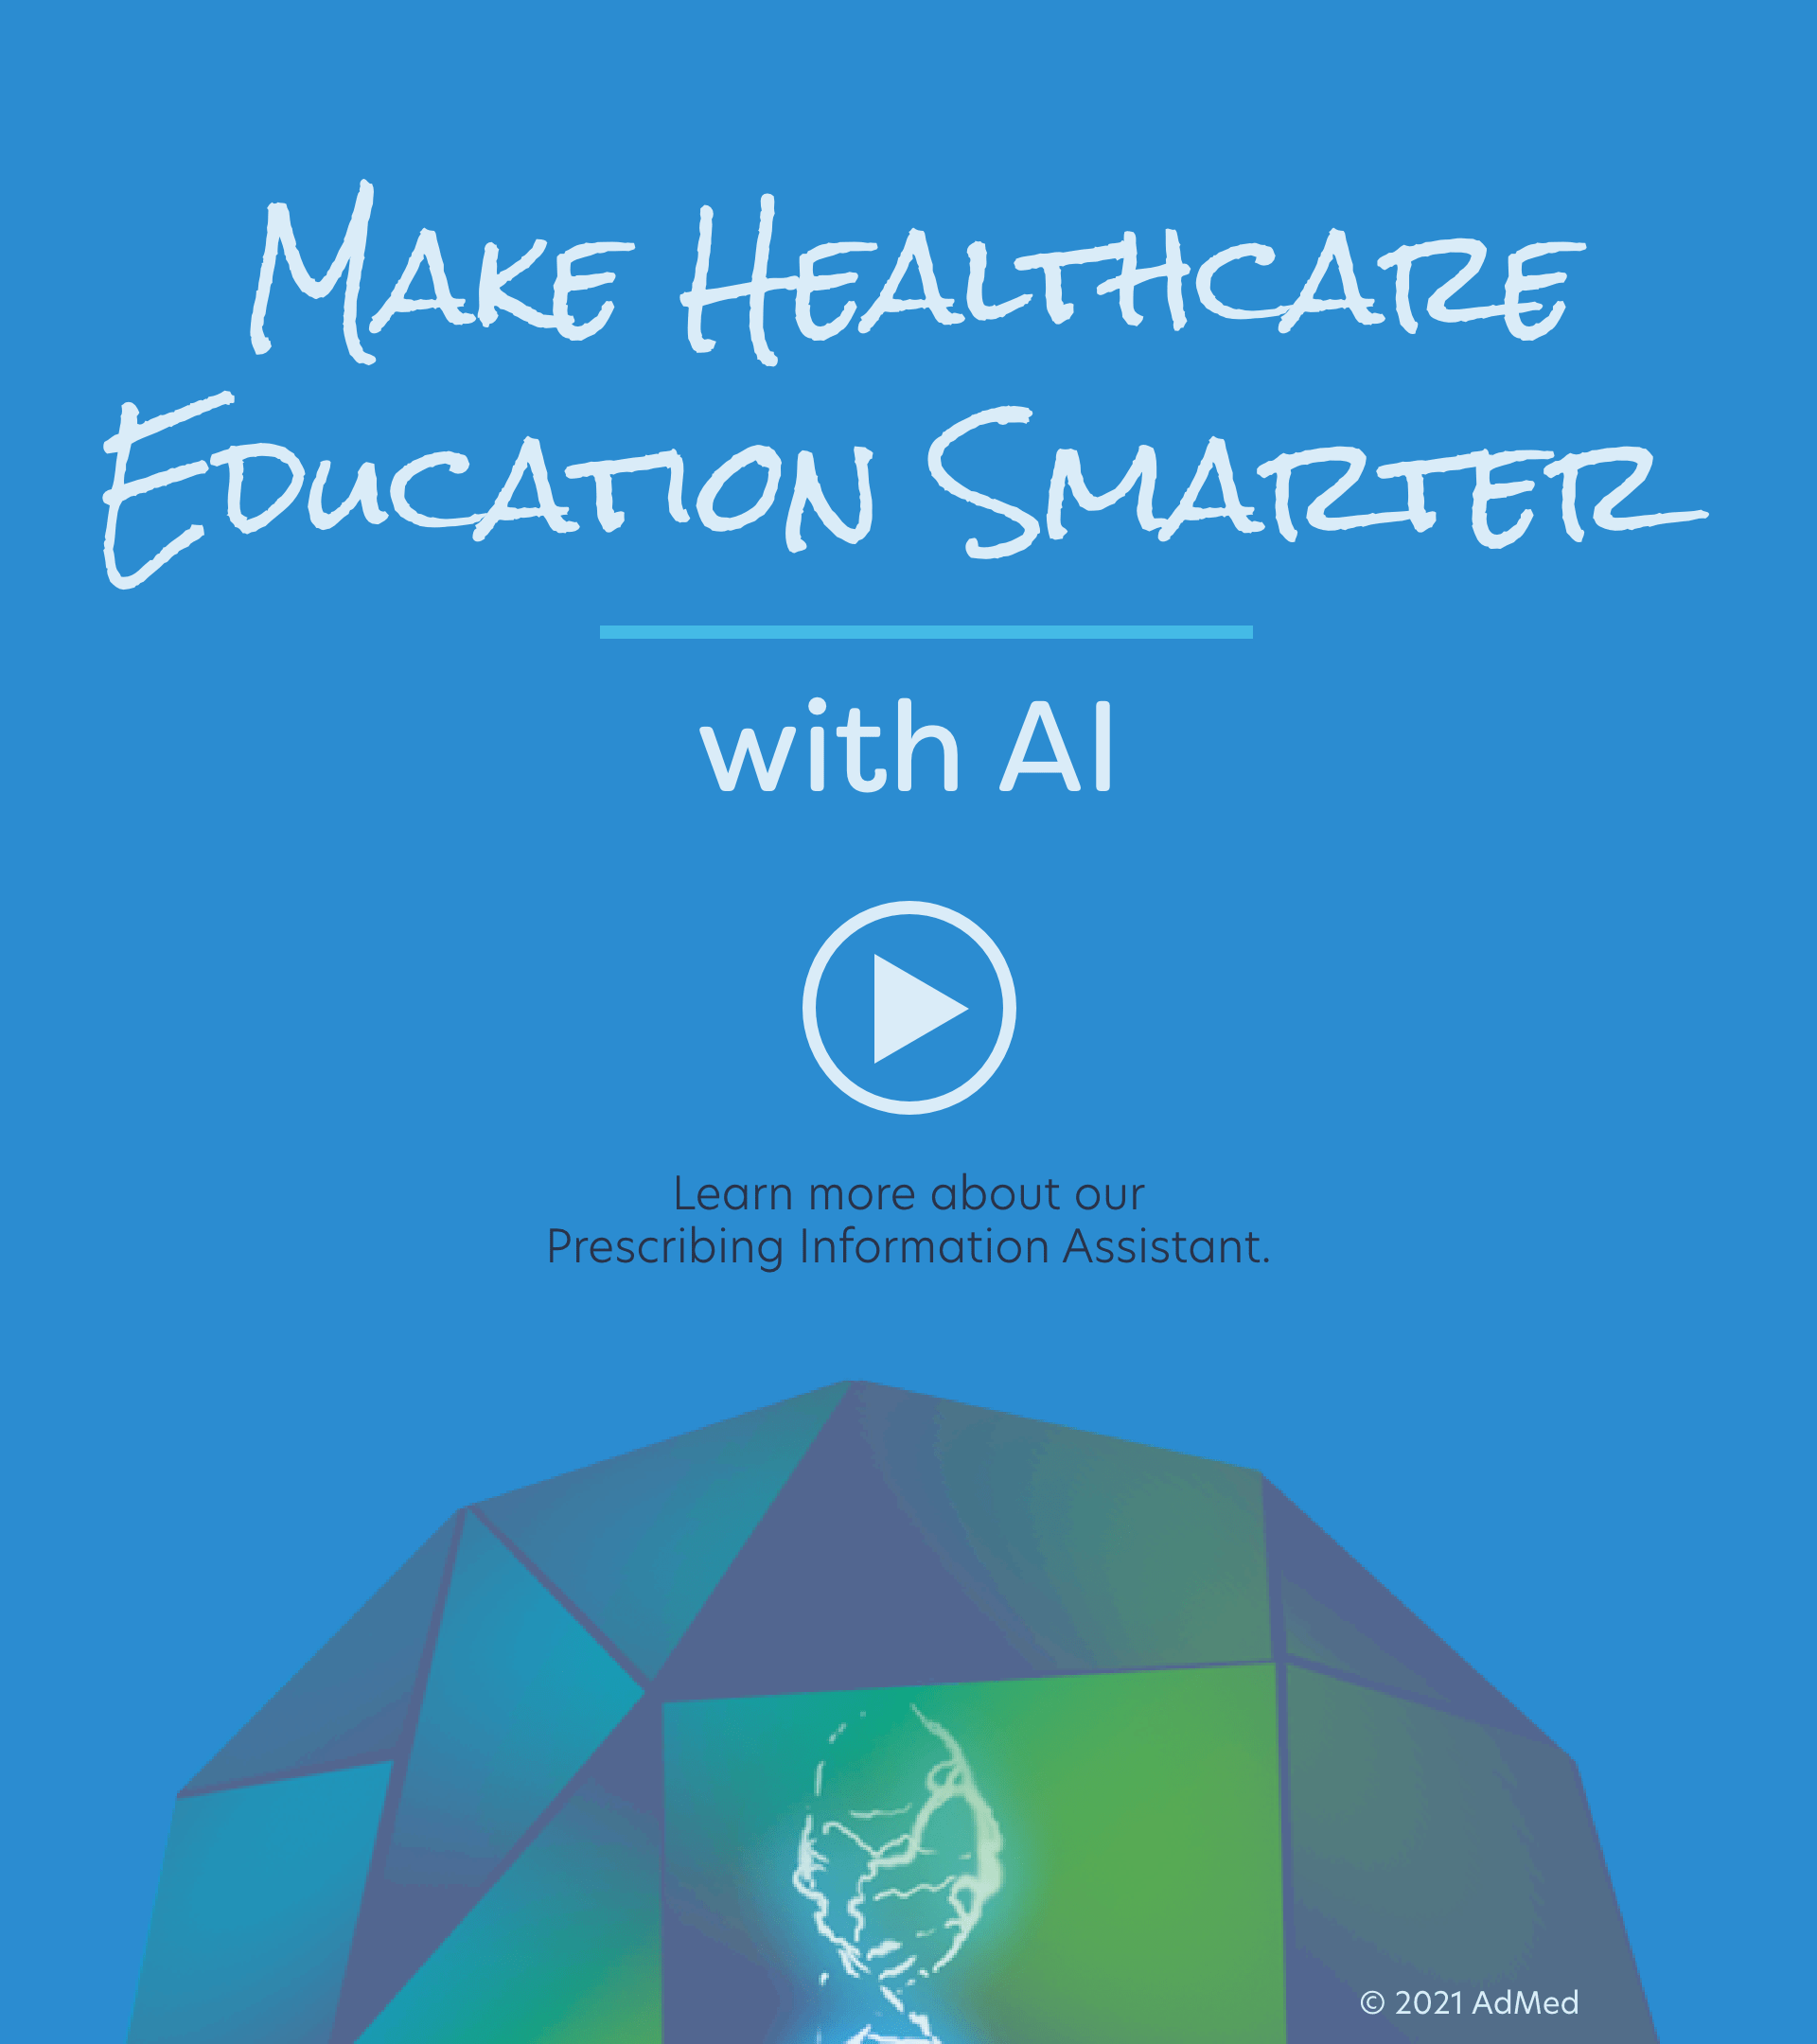 Make Healthcare Education Smarter with AdMed